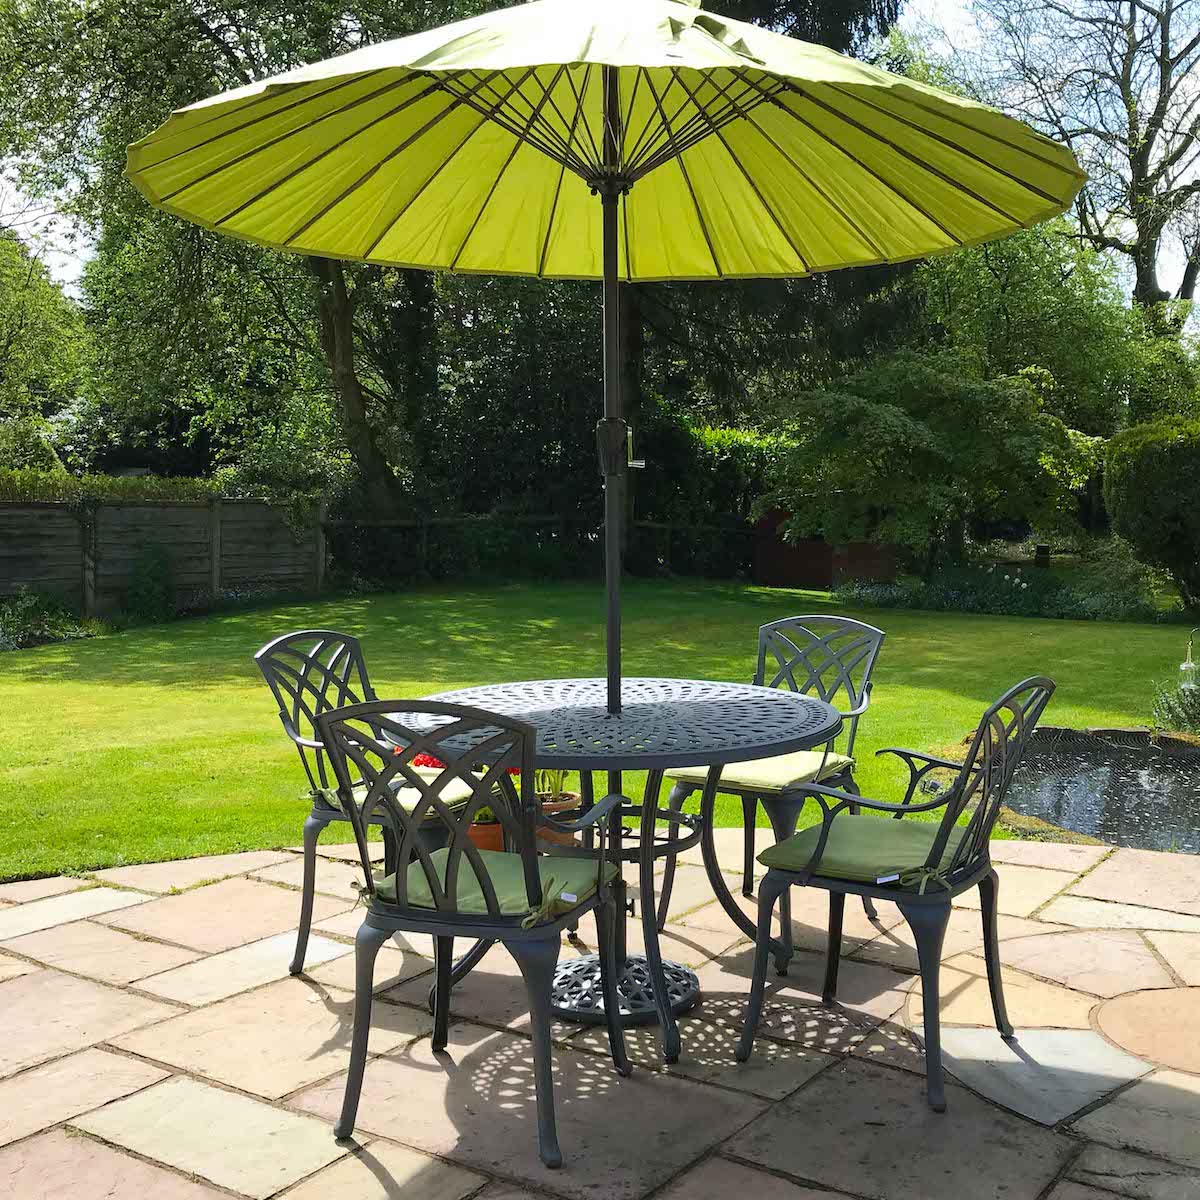 How to maintain your metal garden furniture